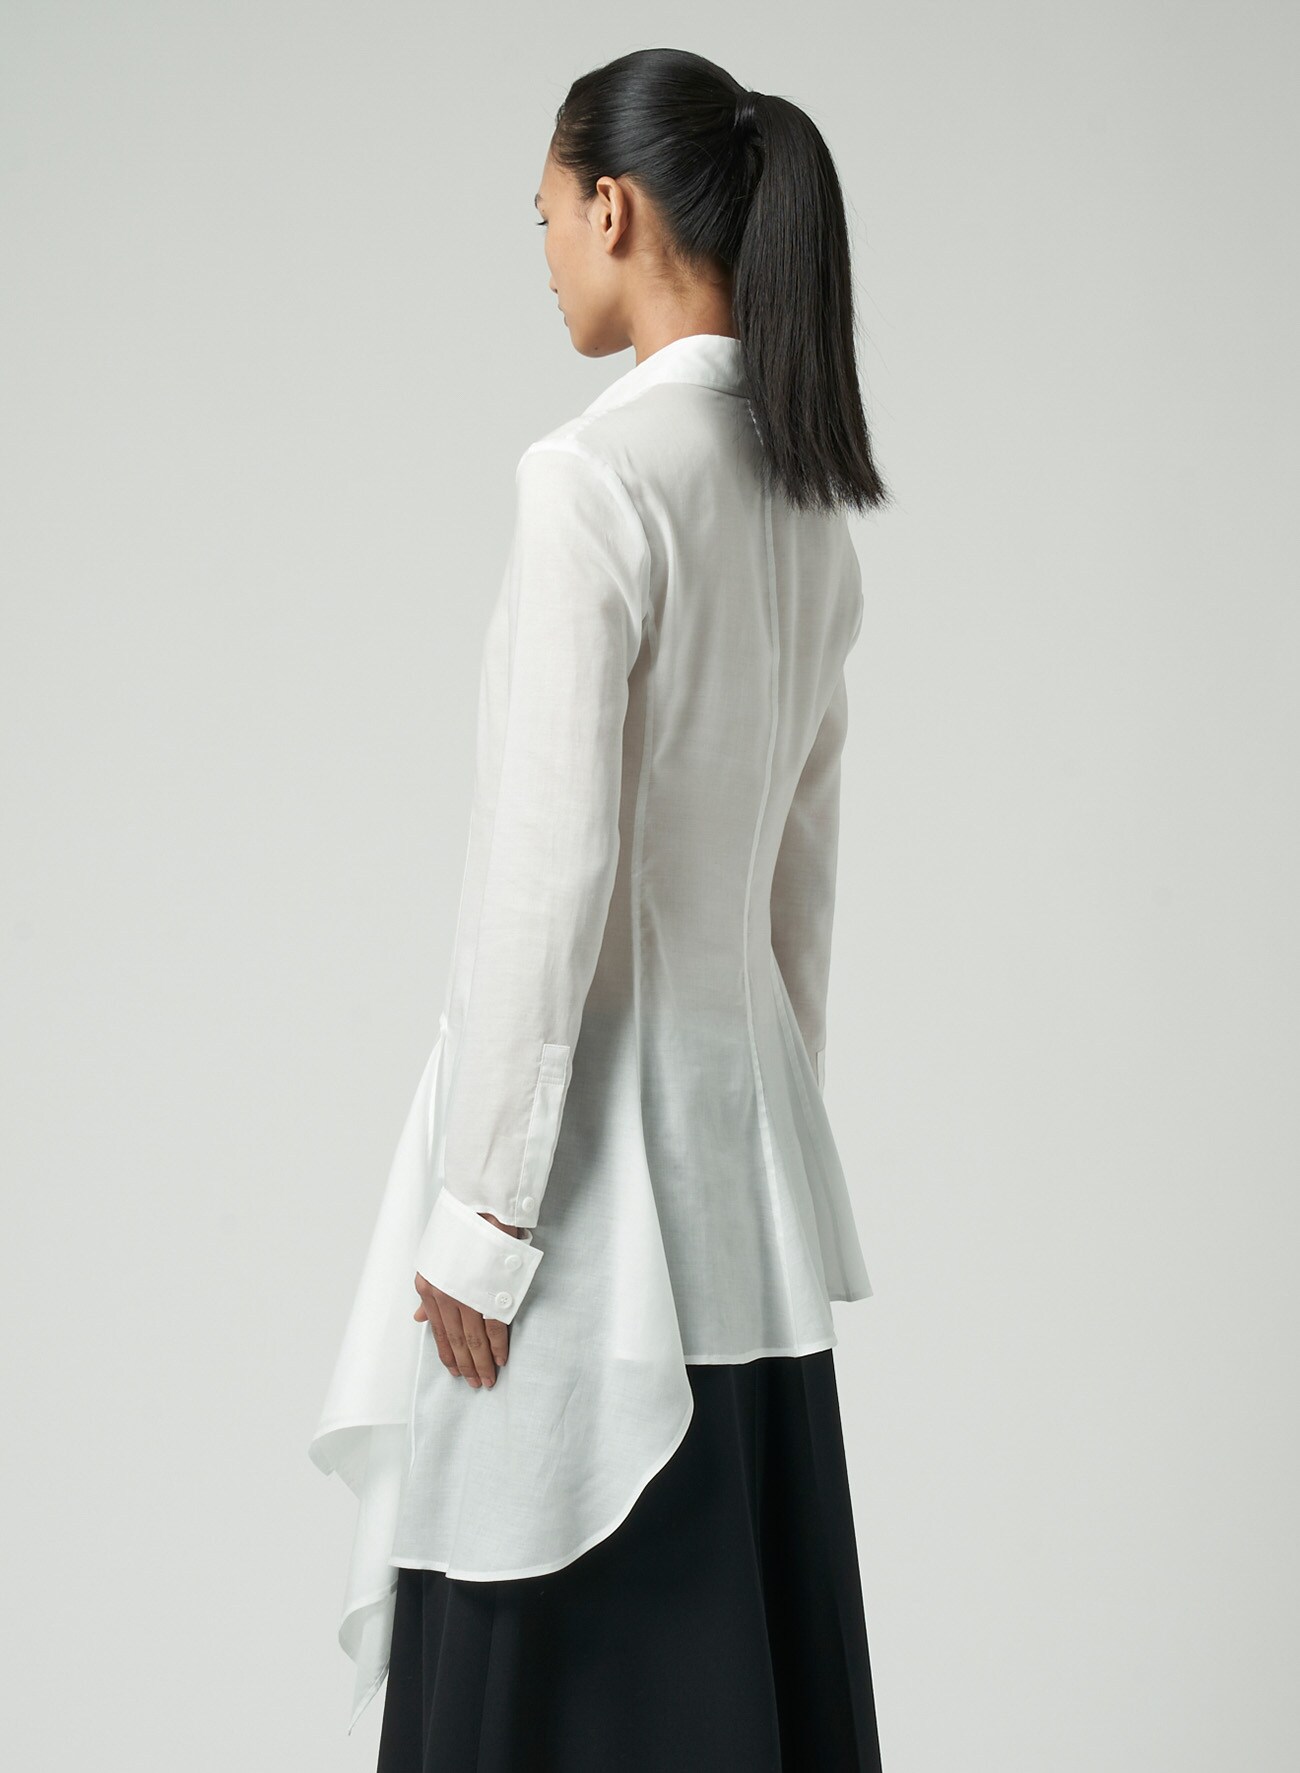 CELLULOSE LAWN SHIRT WITH FRONT HEM DRAPE DETAIL(XS White): power 